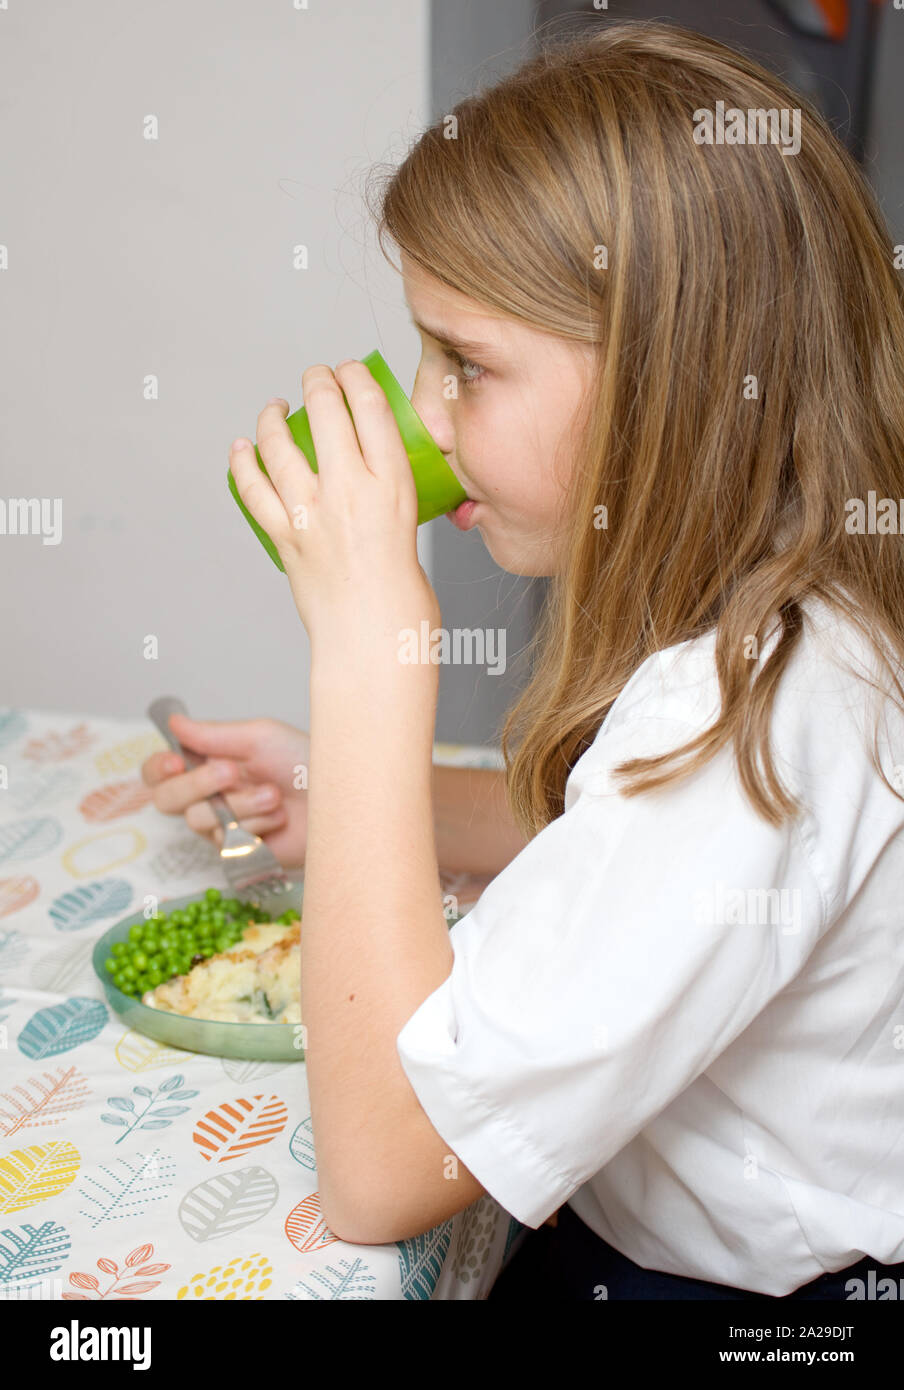 11 year old girl drinking water at the dinner table Stock Photo